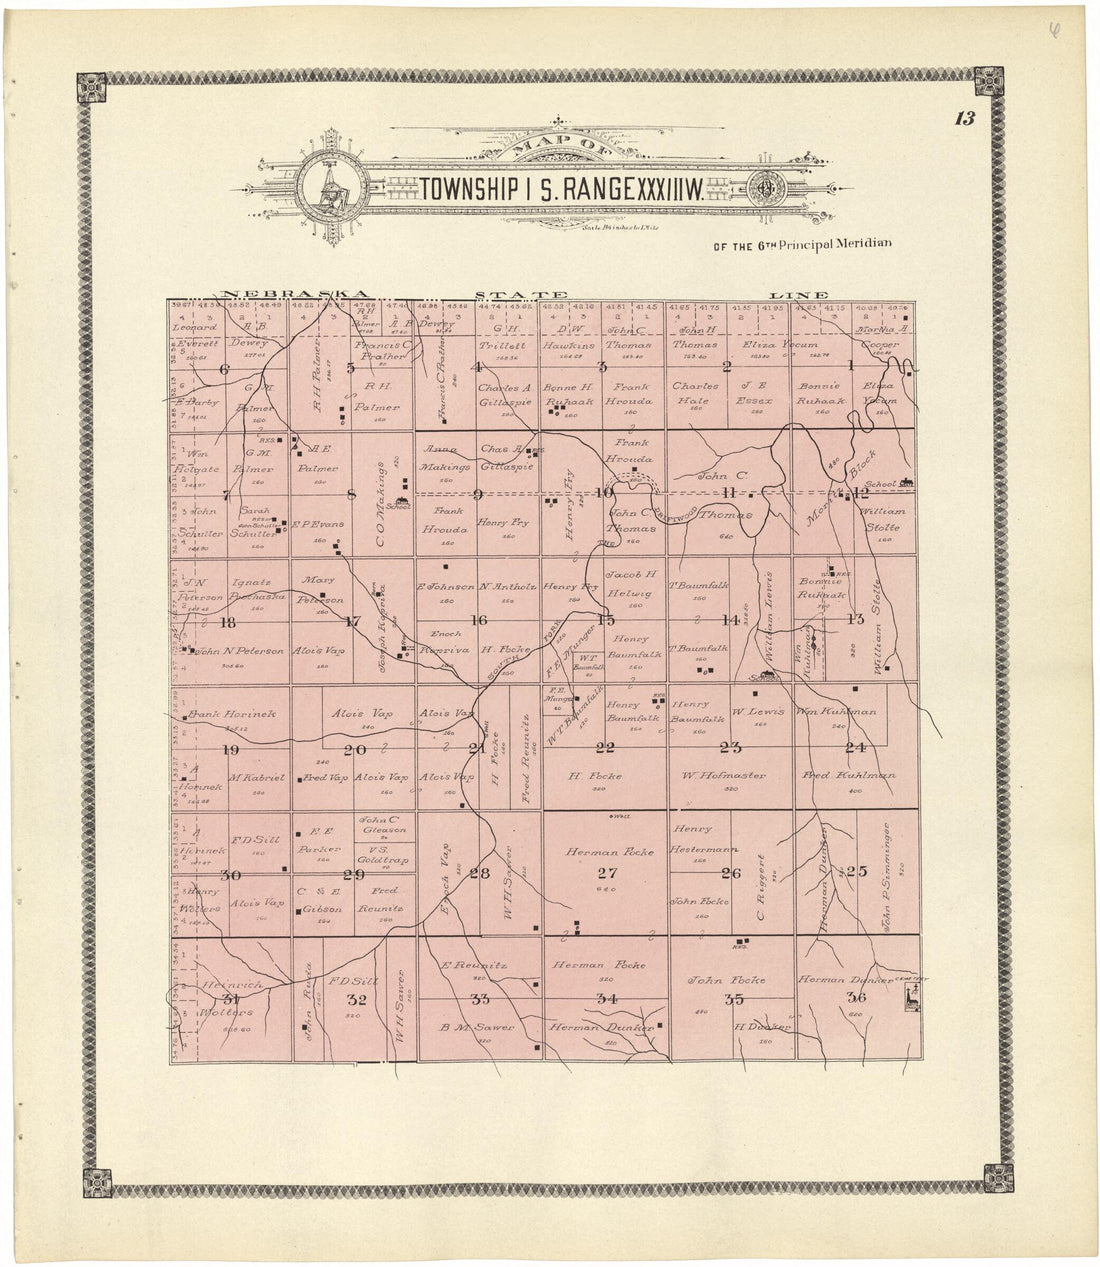 This old map of Map of Township 1 S. Range XXXIII W. from Standard Atlas of Rawlins County, Kansas from 1906 was created by  Geo. A. Ogle &amp; Co in 1906